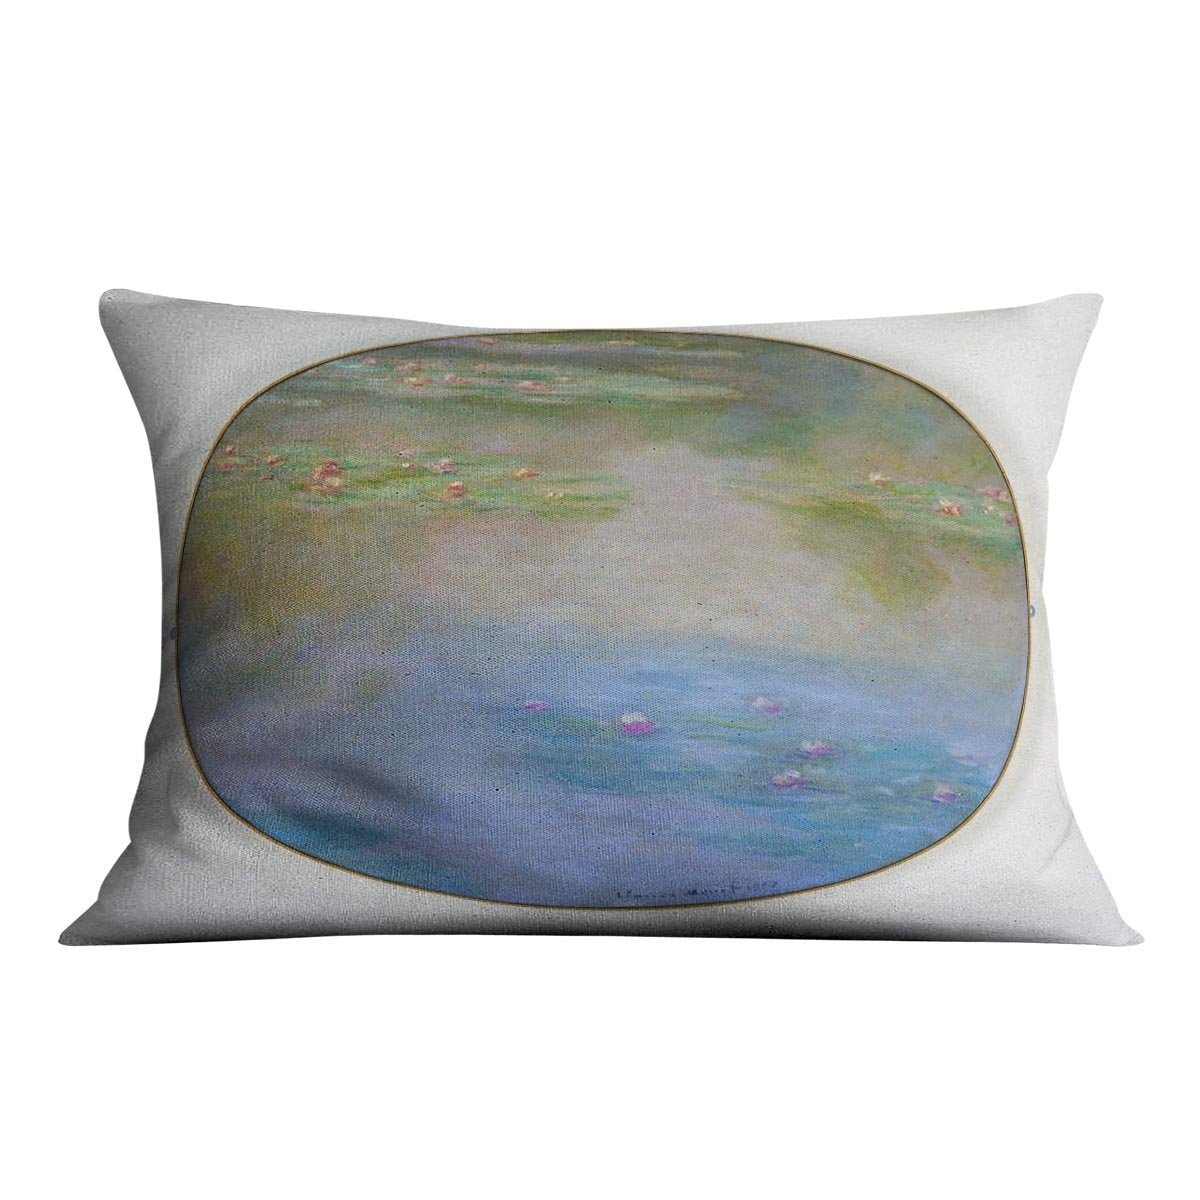 Nympheas By Manet Throw Pillow